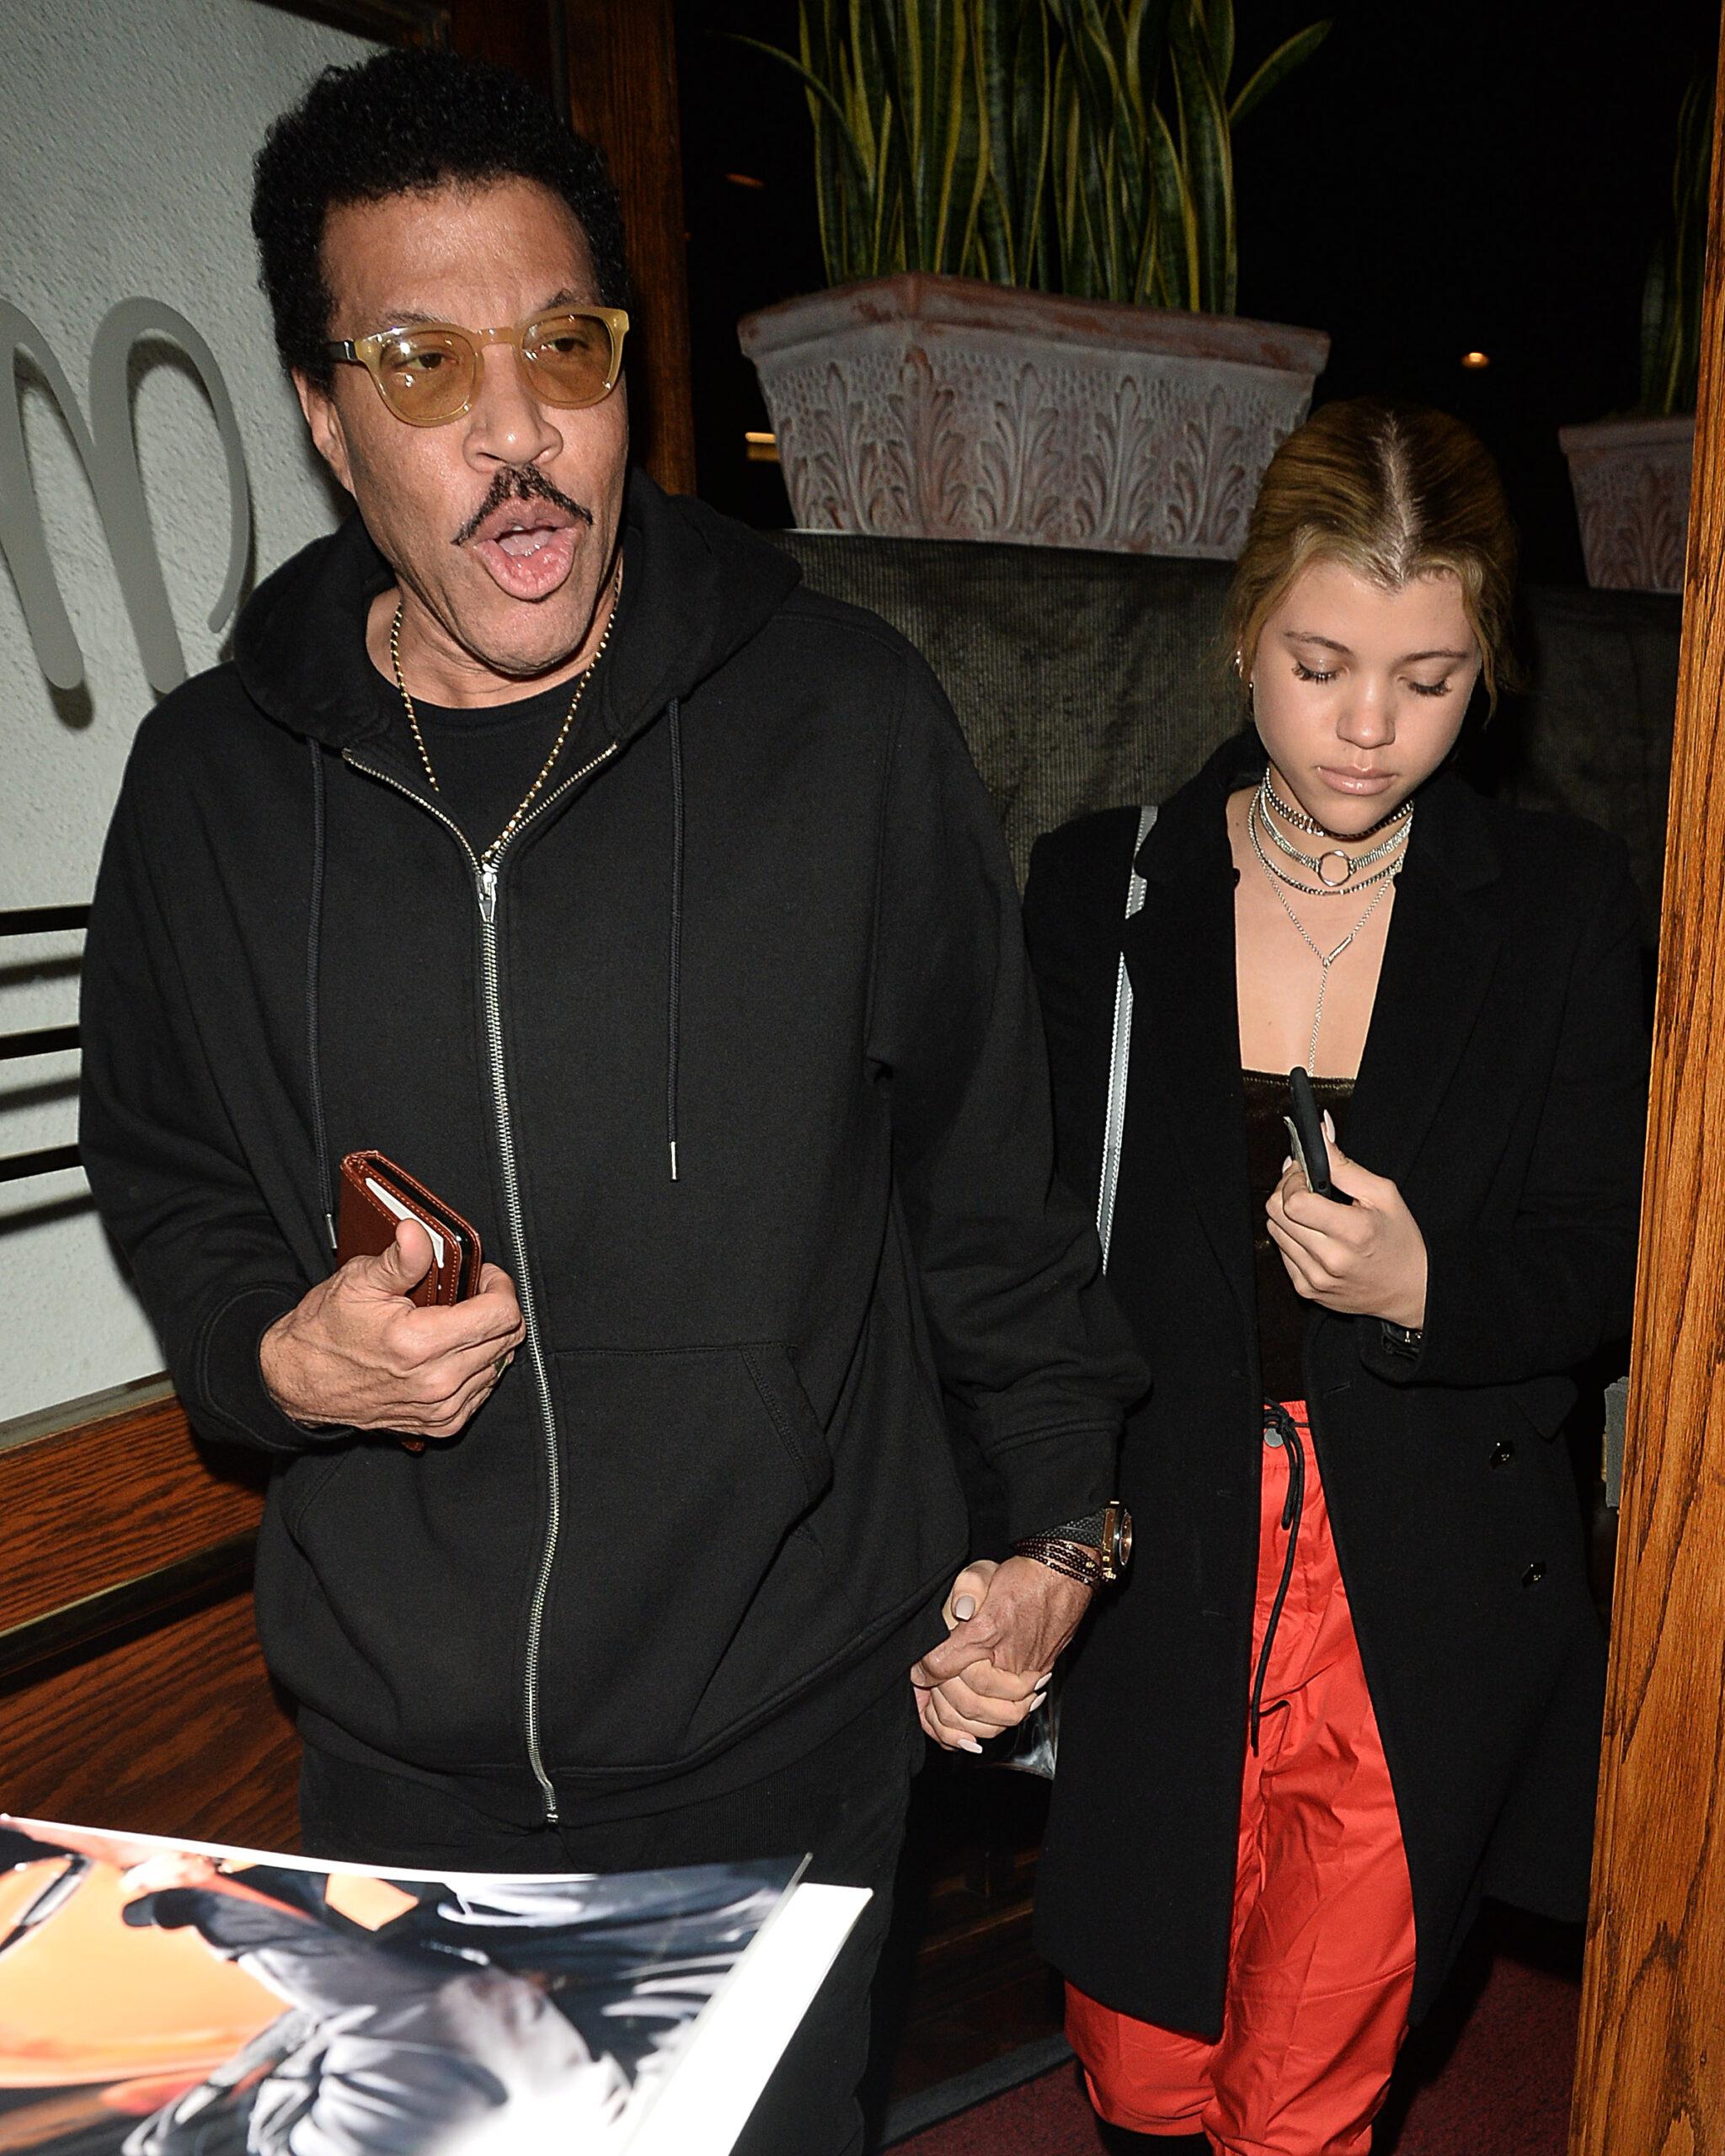 Sofia Richie and Lionel Richie Have Dinner at Madeos